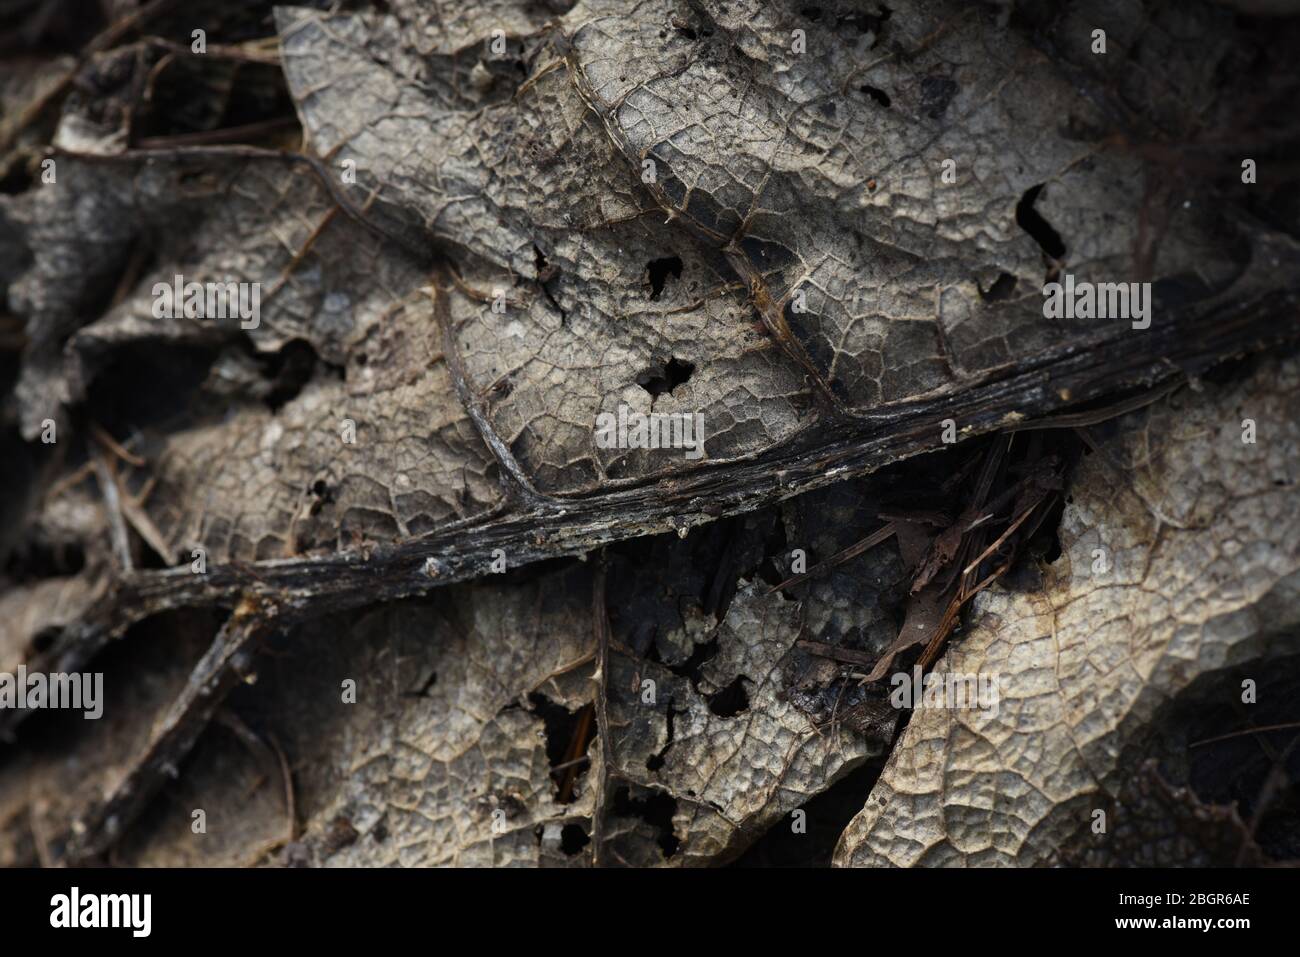 A macro close up view of dead, dried and decaying leaves showing the veins on the surface structure. Stock Photo